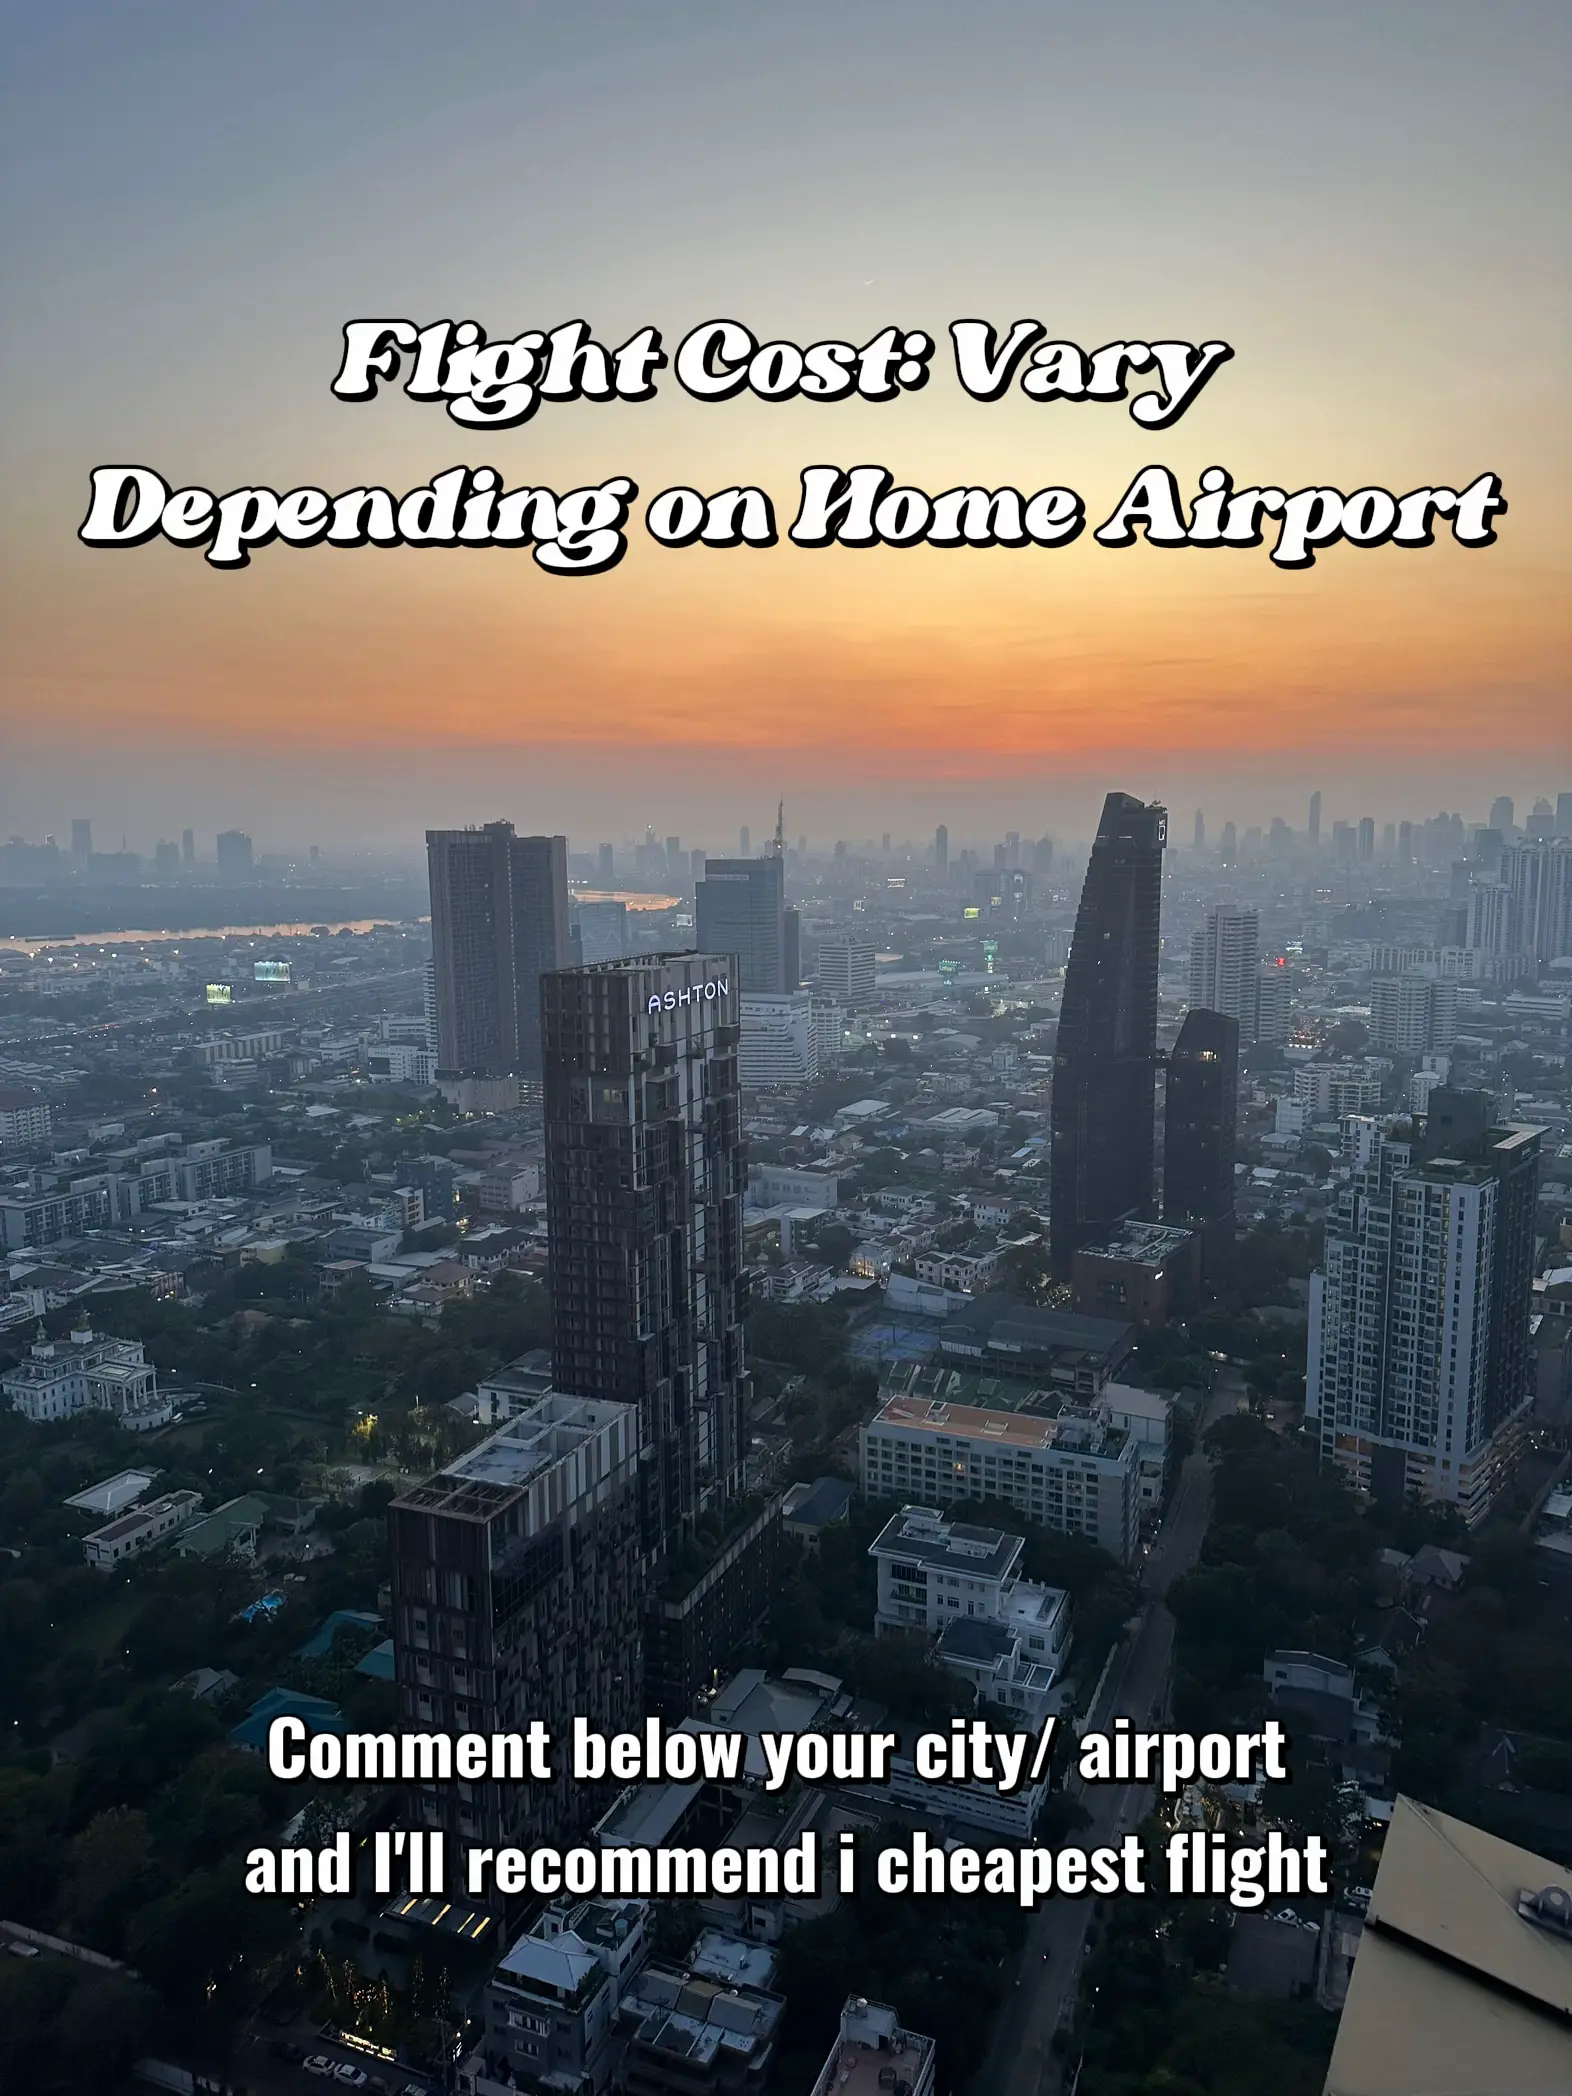  A city skyline with a flight cost varying depending on home airport.